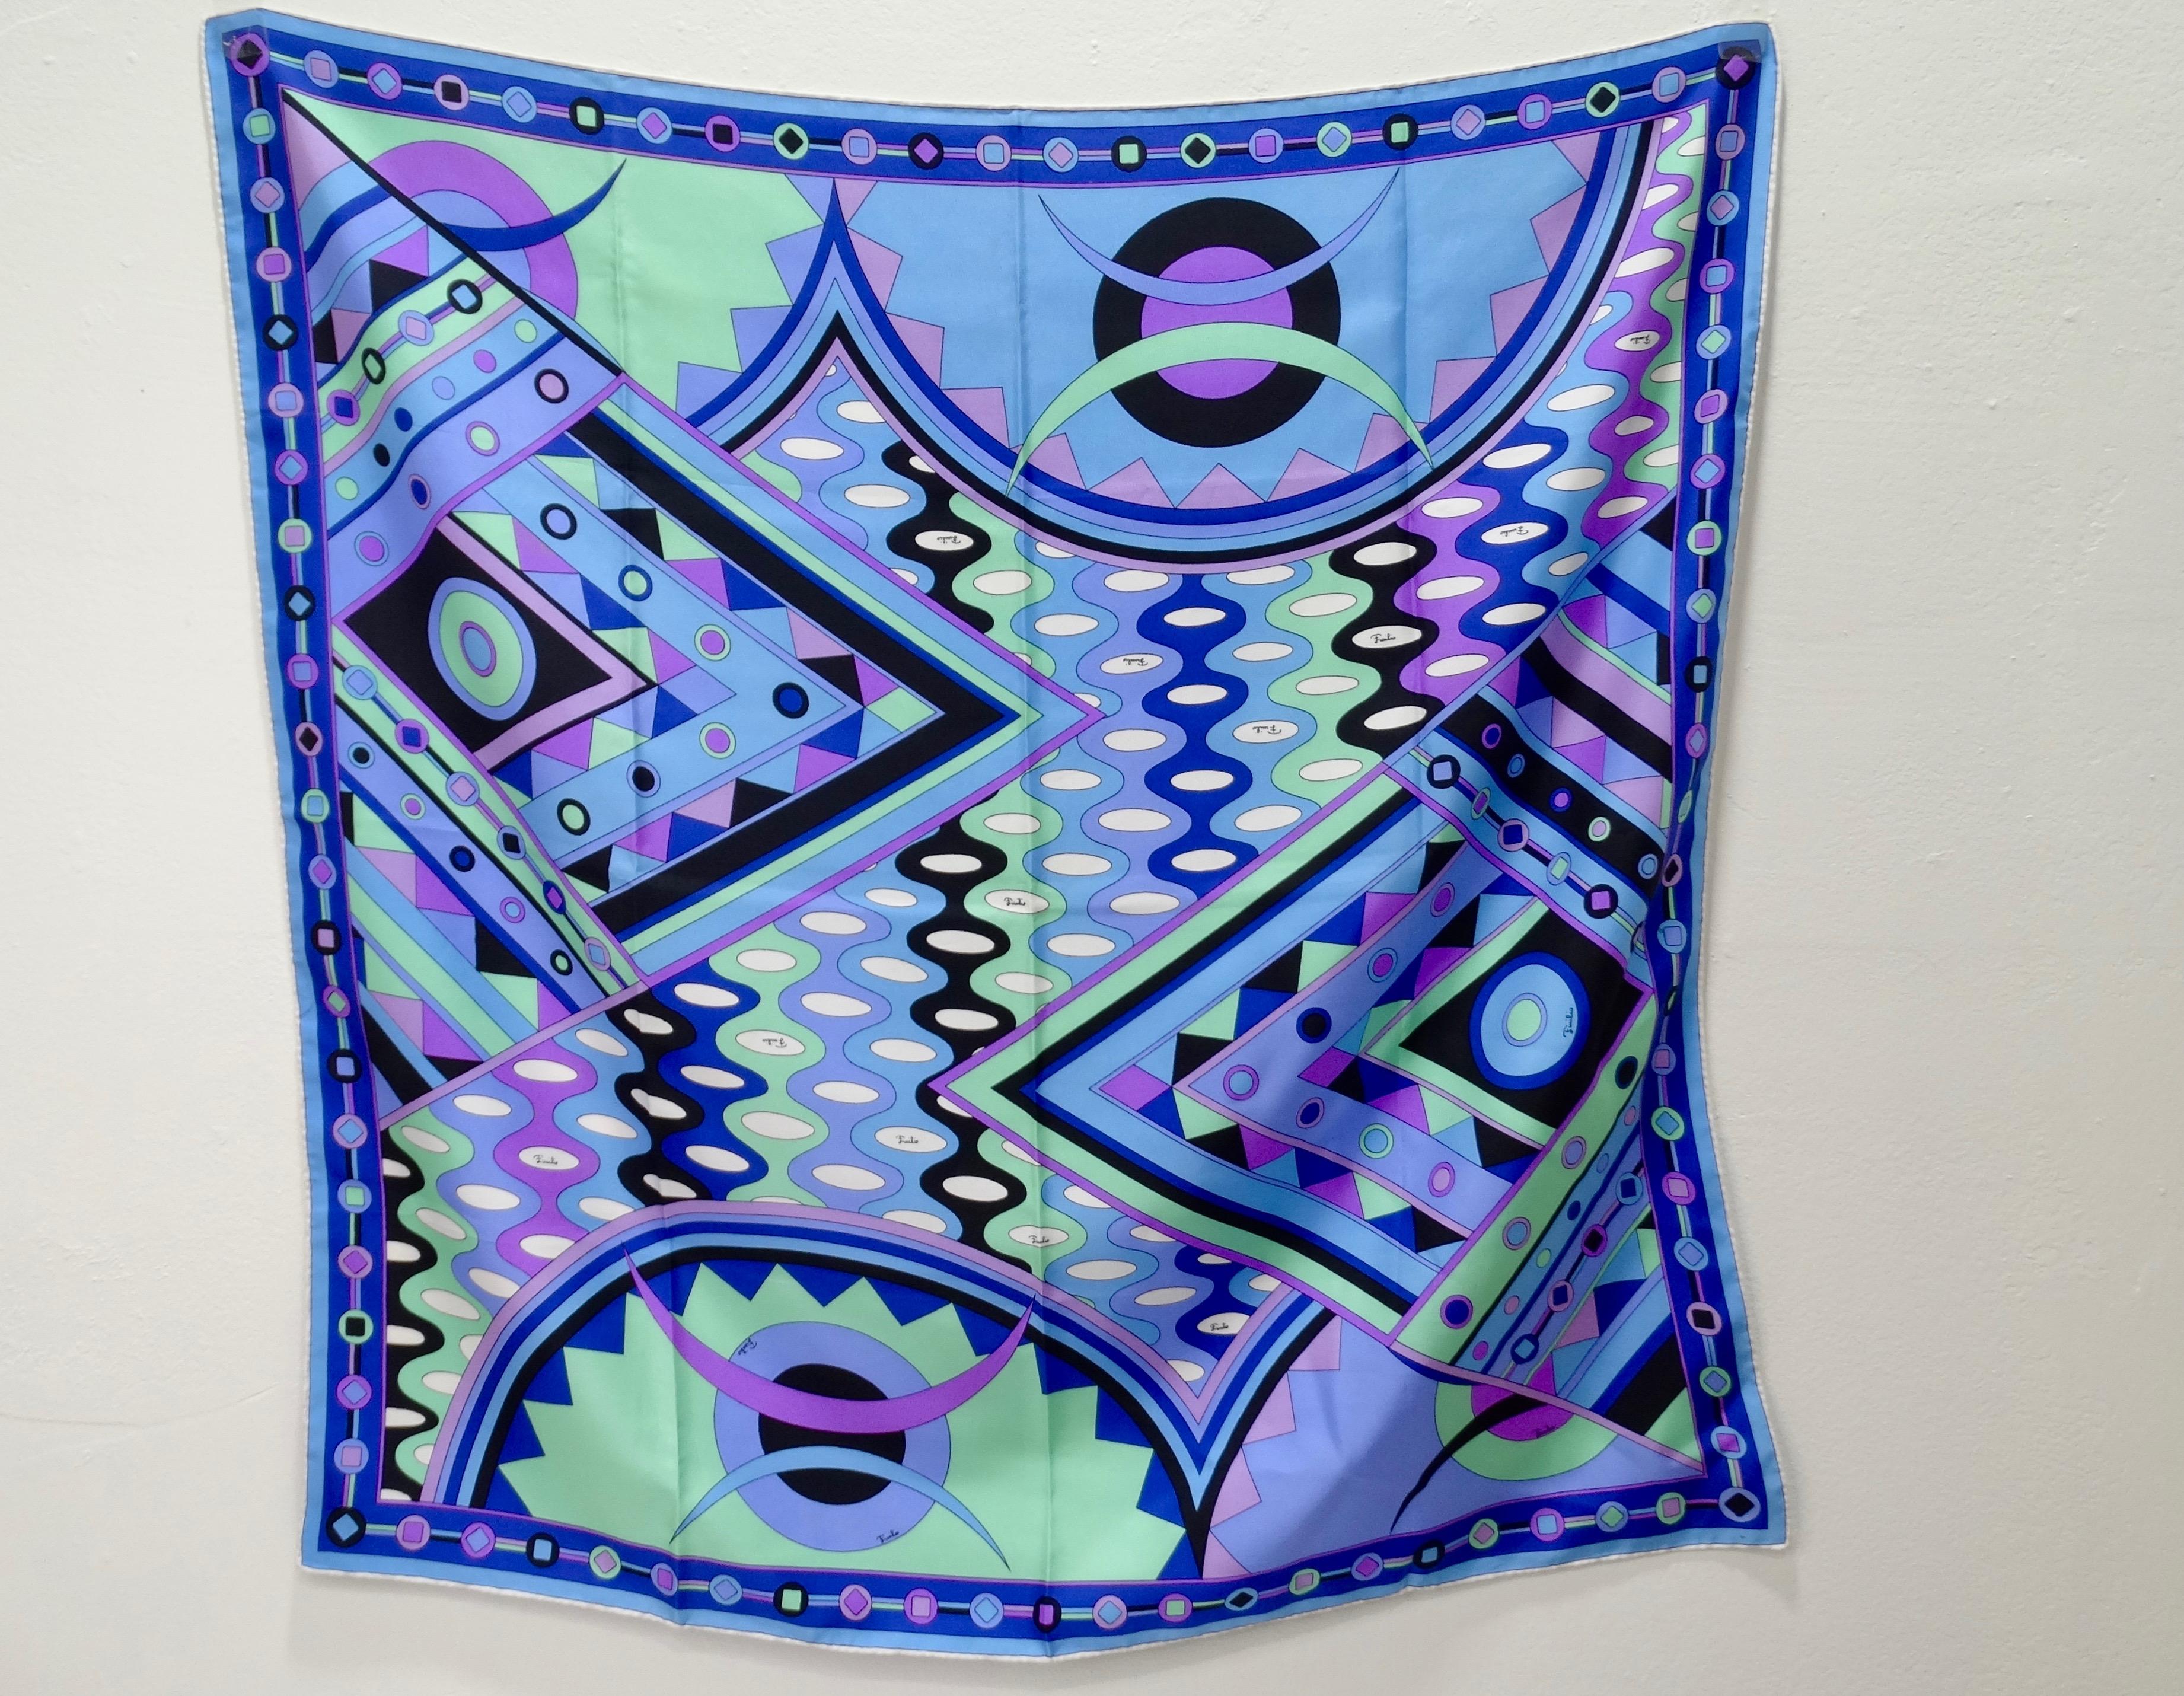 It's never a bad time for some Pucci! Circa 1960s, this amazing silk scarf features one of Pucci's signature abstract designs with various geometric shapes and vibrant blues, purples and mint green. Colorful and timeless, this scarf will pair